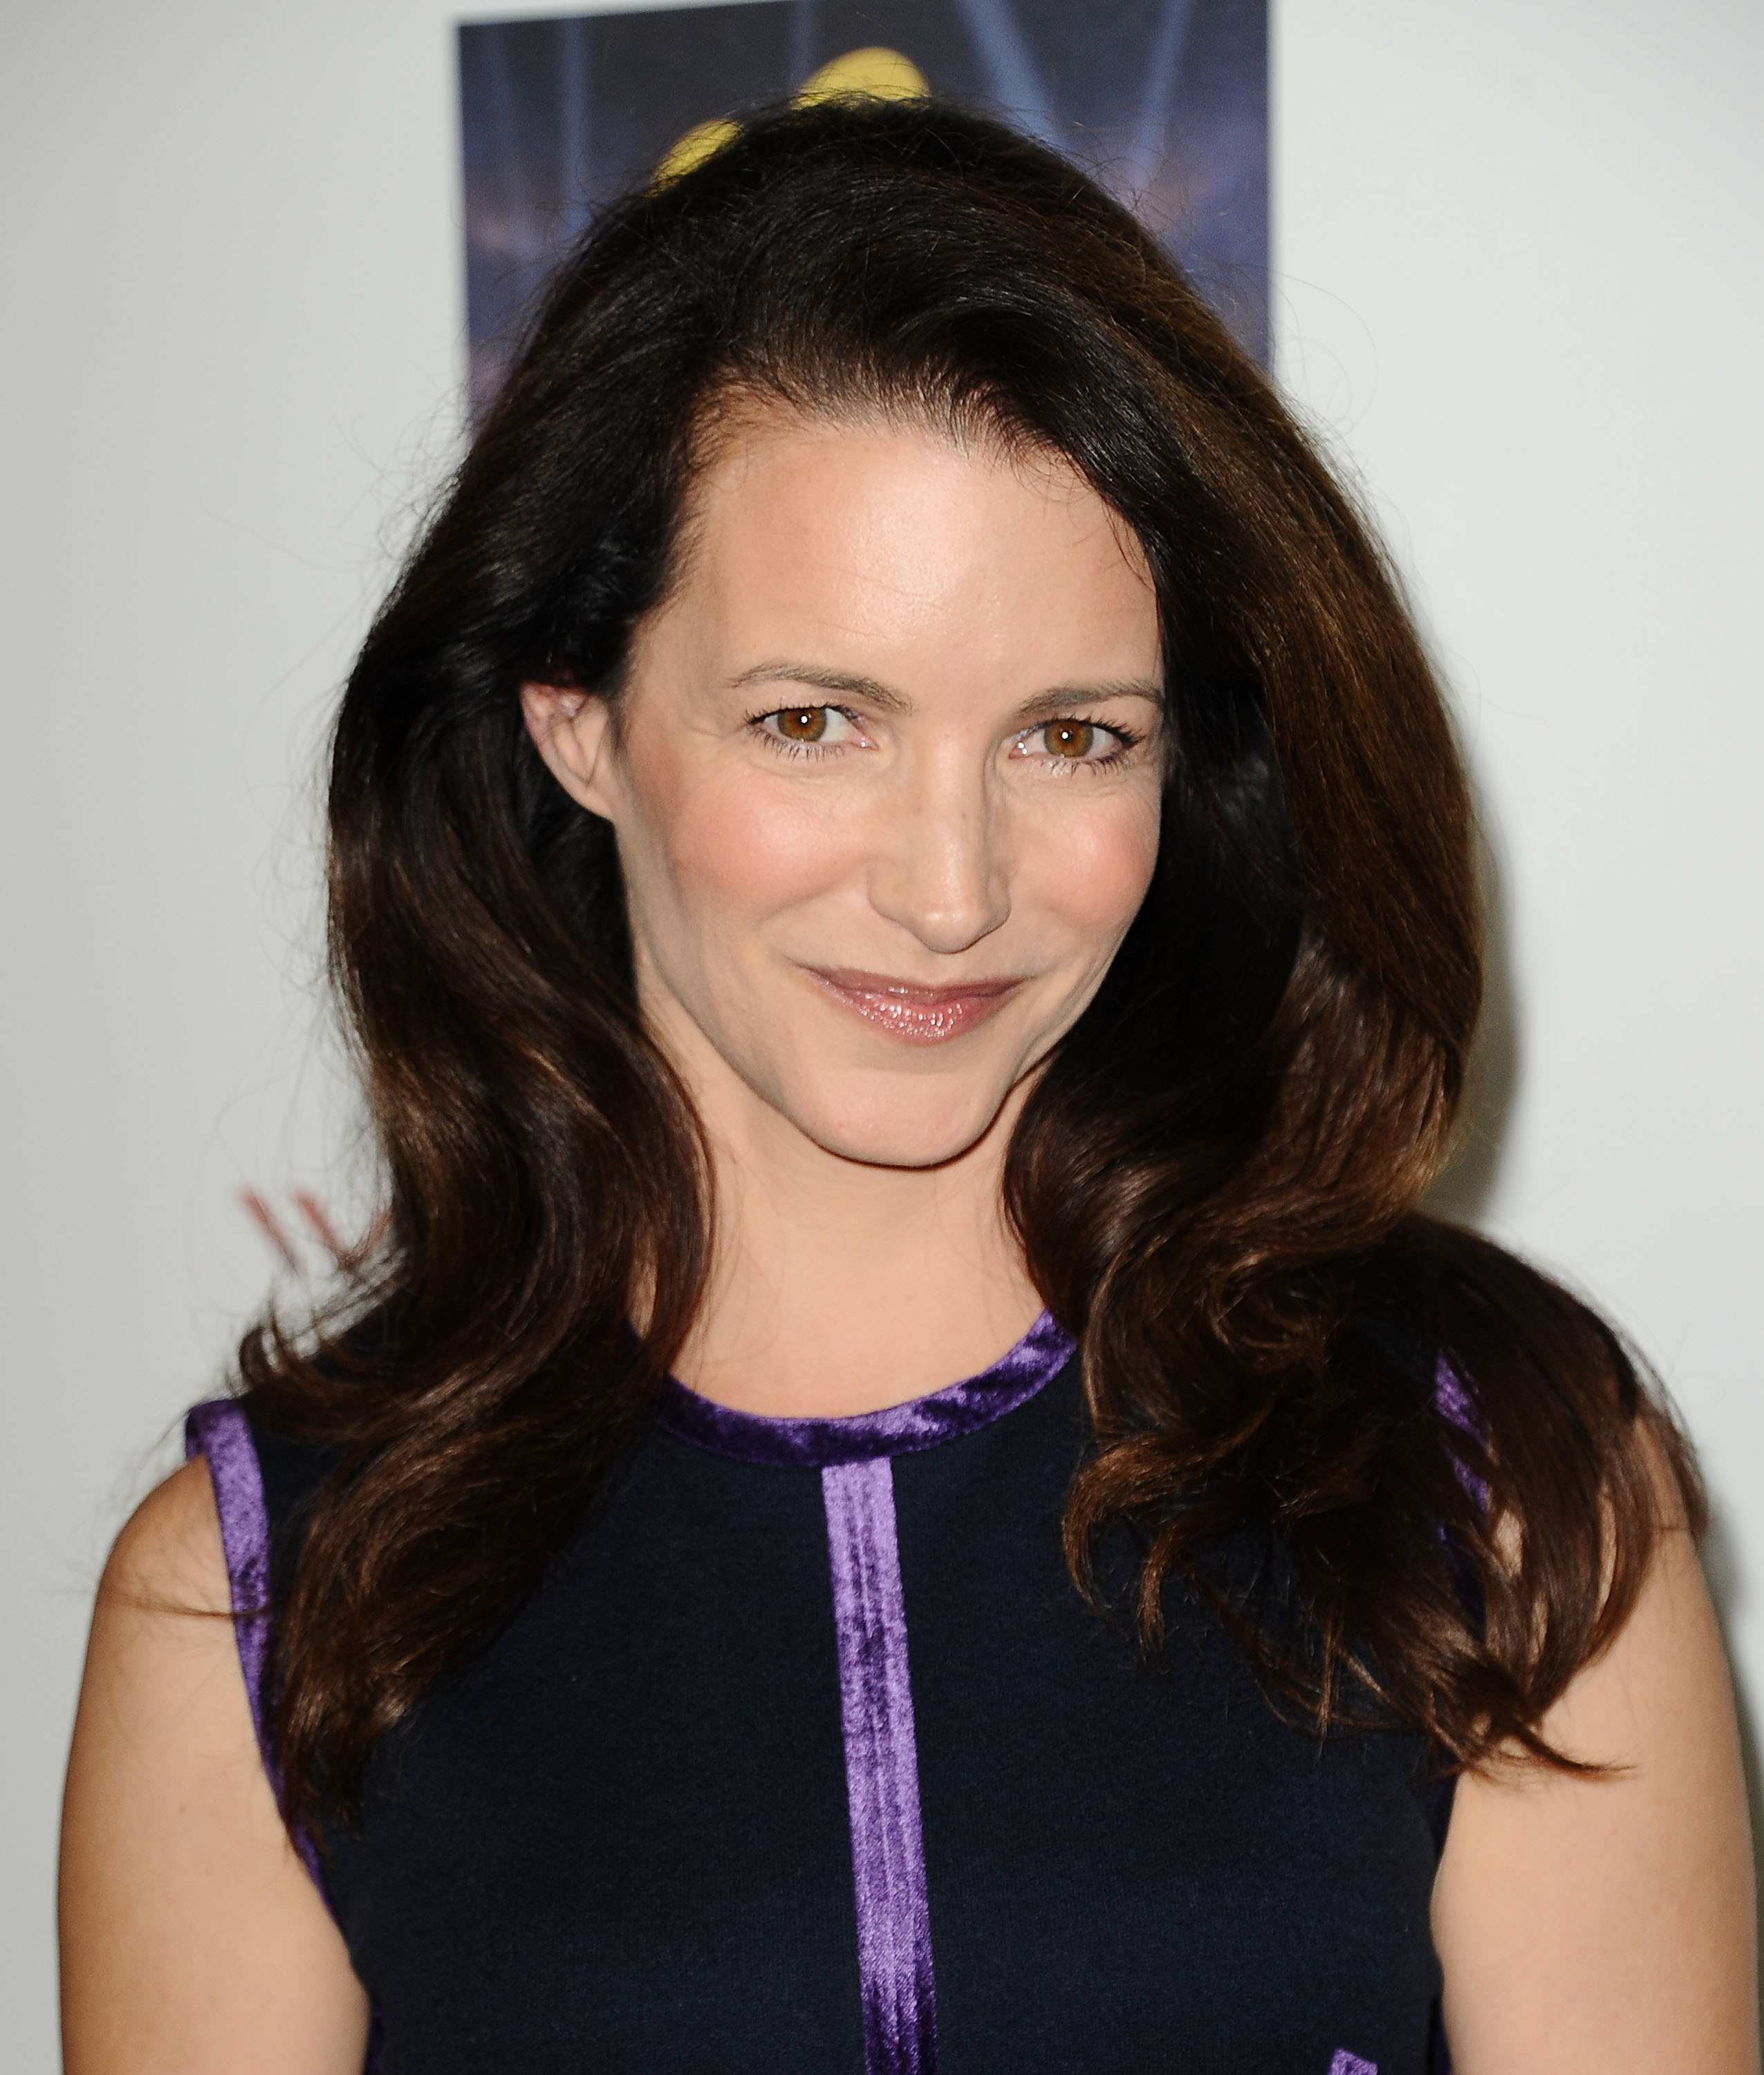 Kristin Davis attends Hugh Jackman's "One Night Only" at Dolby Theatre on October 12, 2013 in Hollywood, California. | Source: Getty Images